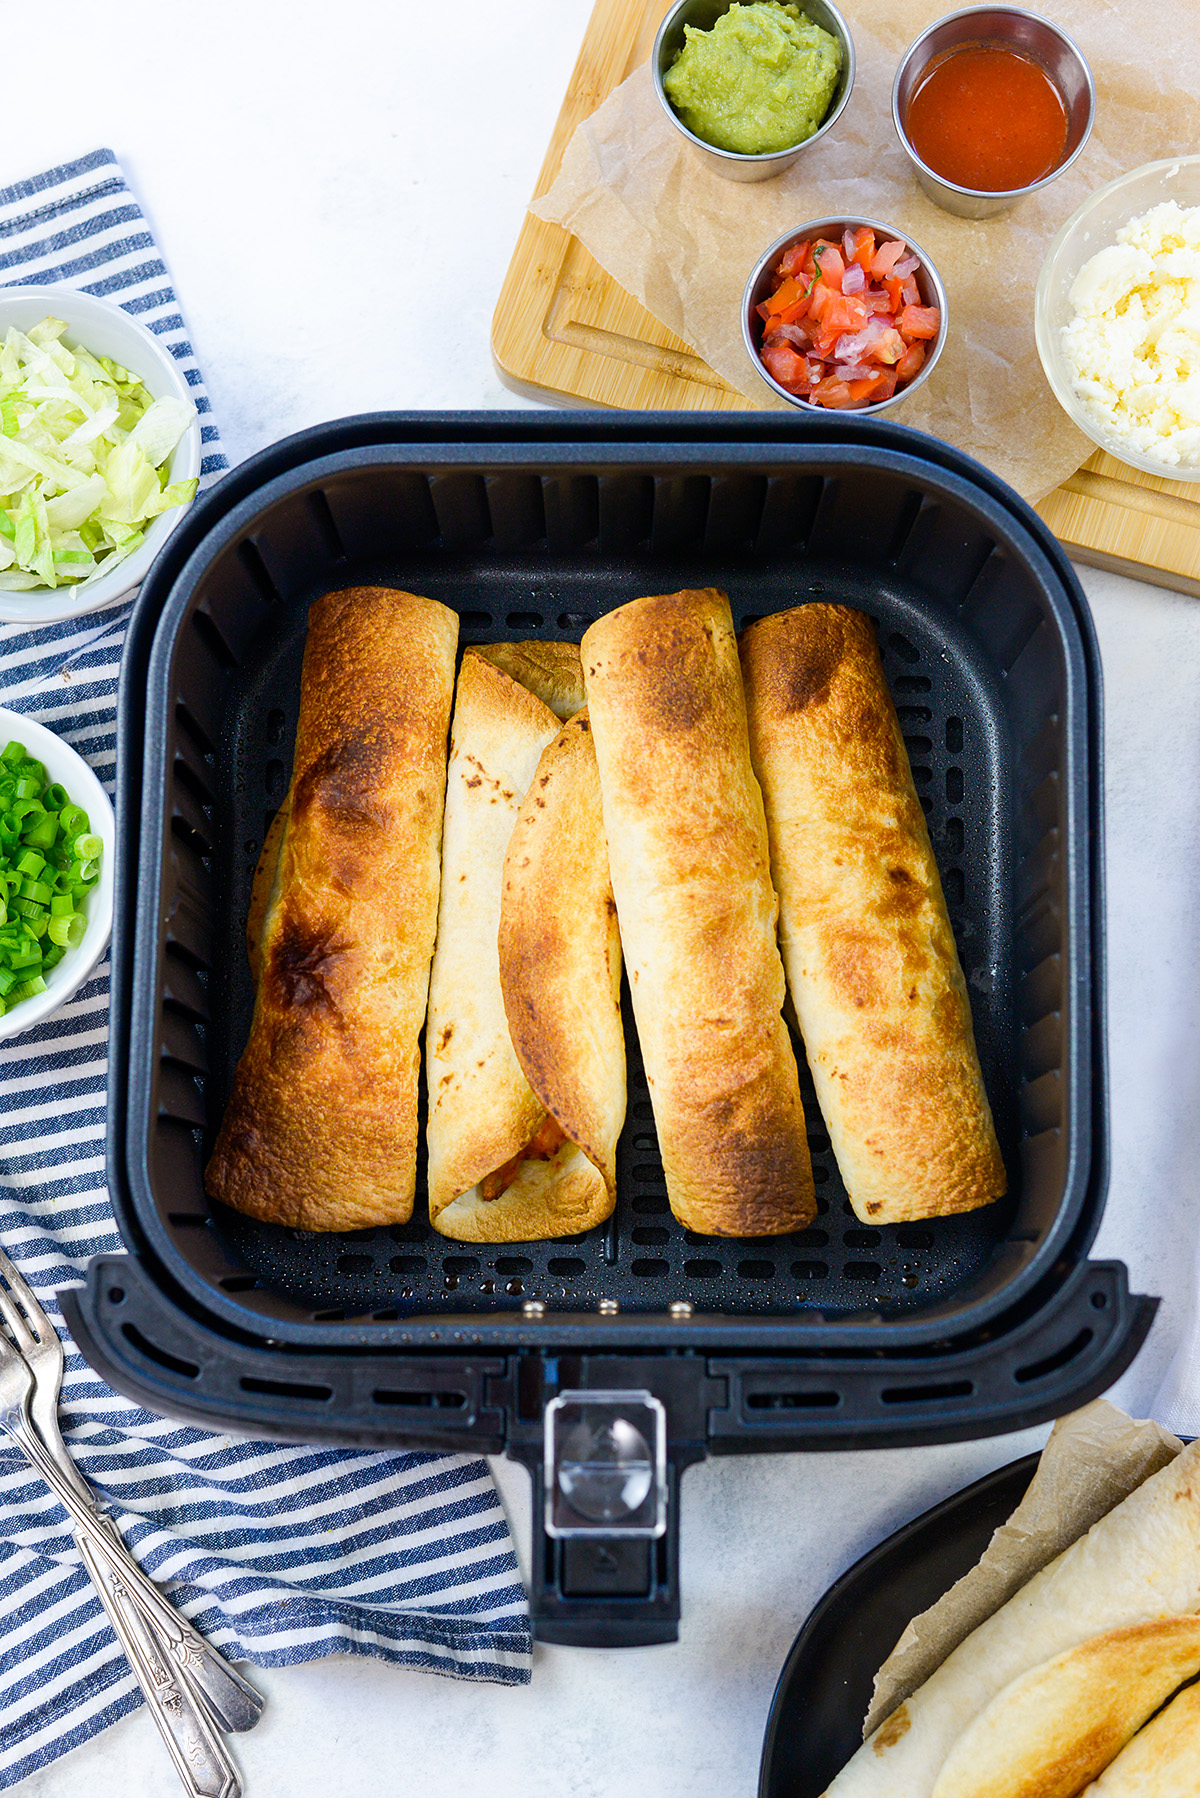 Four cooked flautas in an air fryer basket.